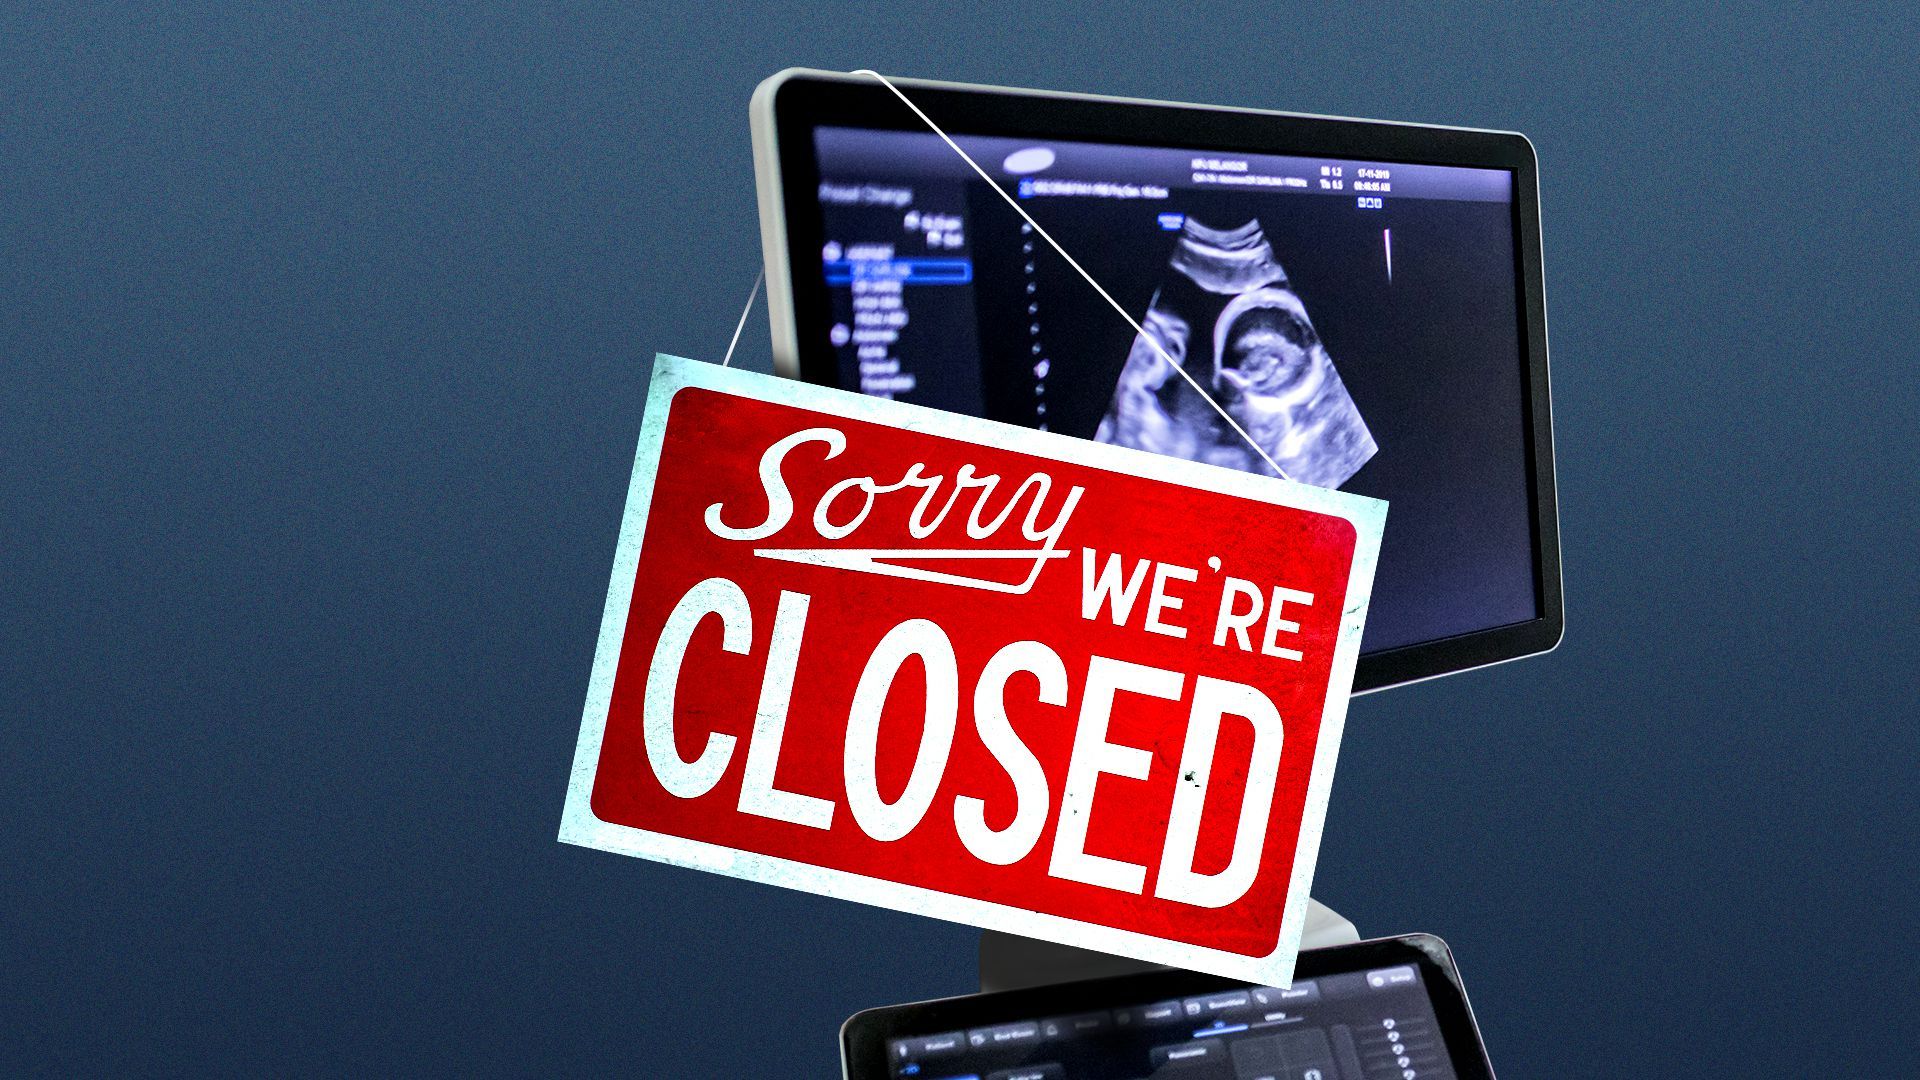 Illustration of a sign saying "SORRY WE'RE CLOSED" hanging from a sonogram monitor